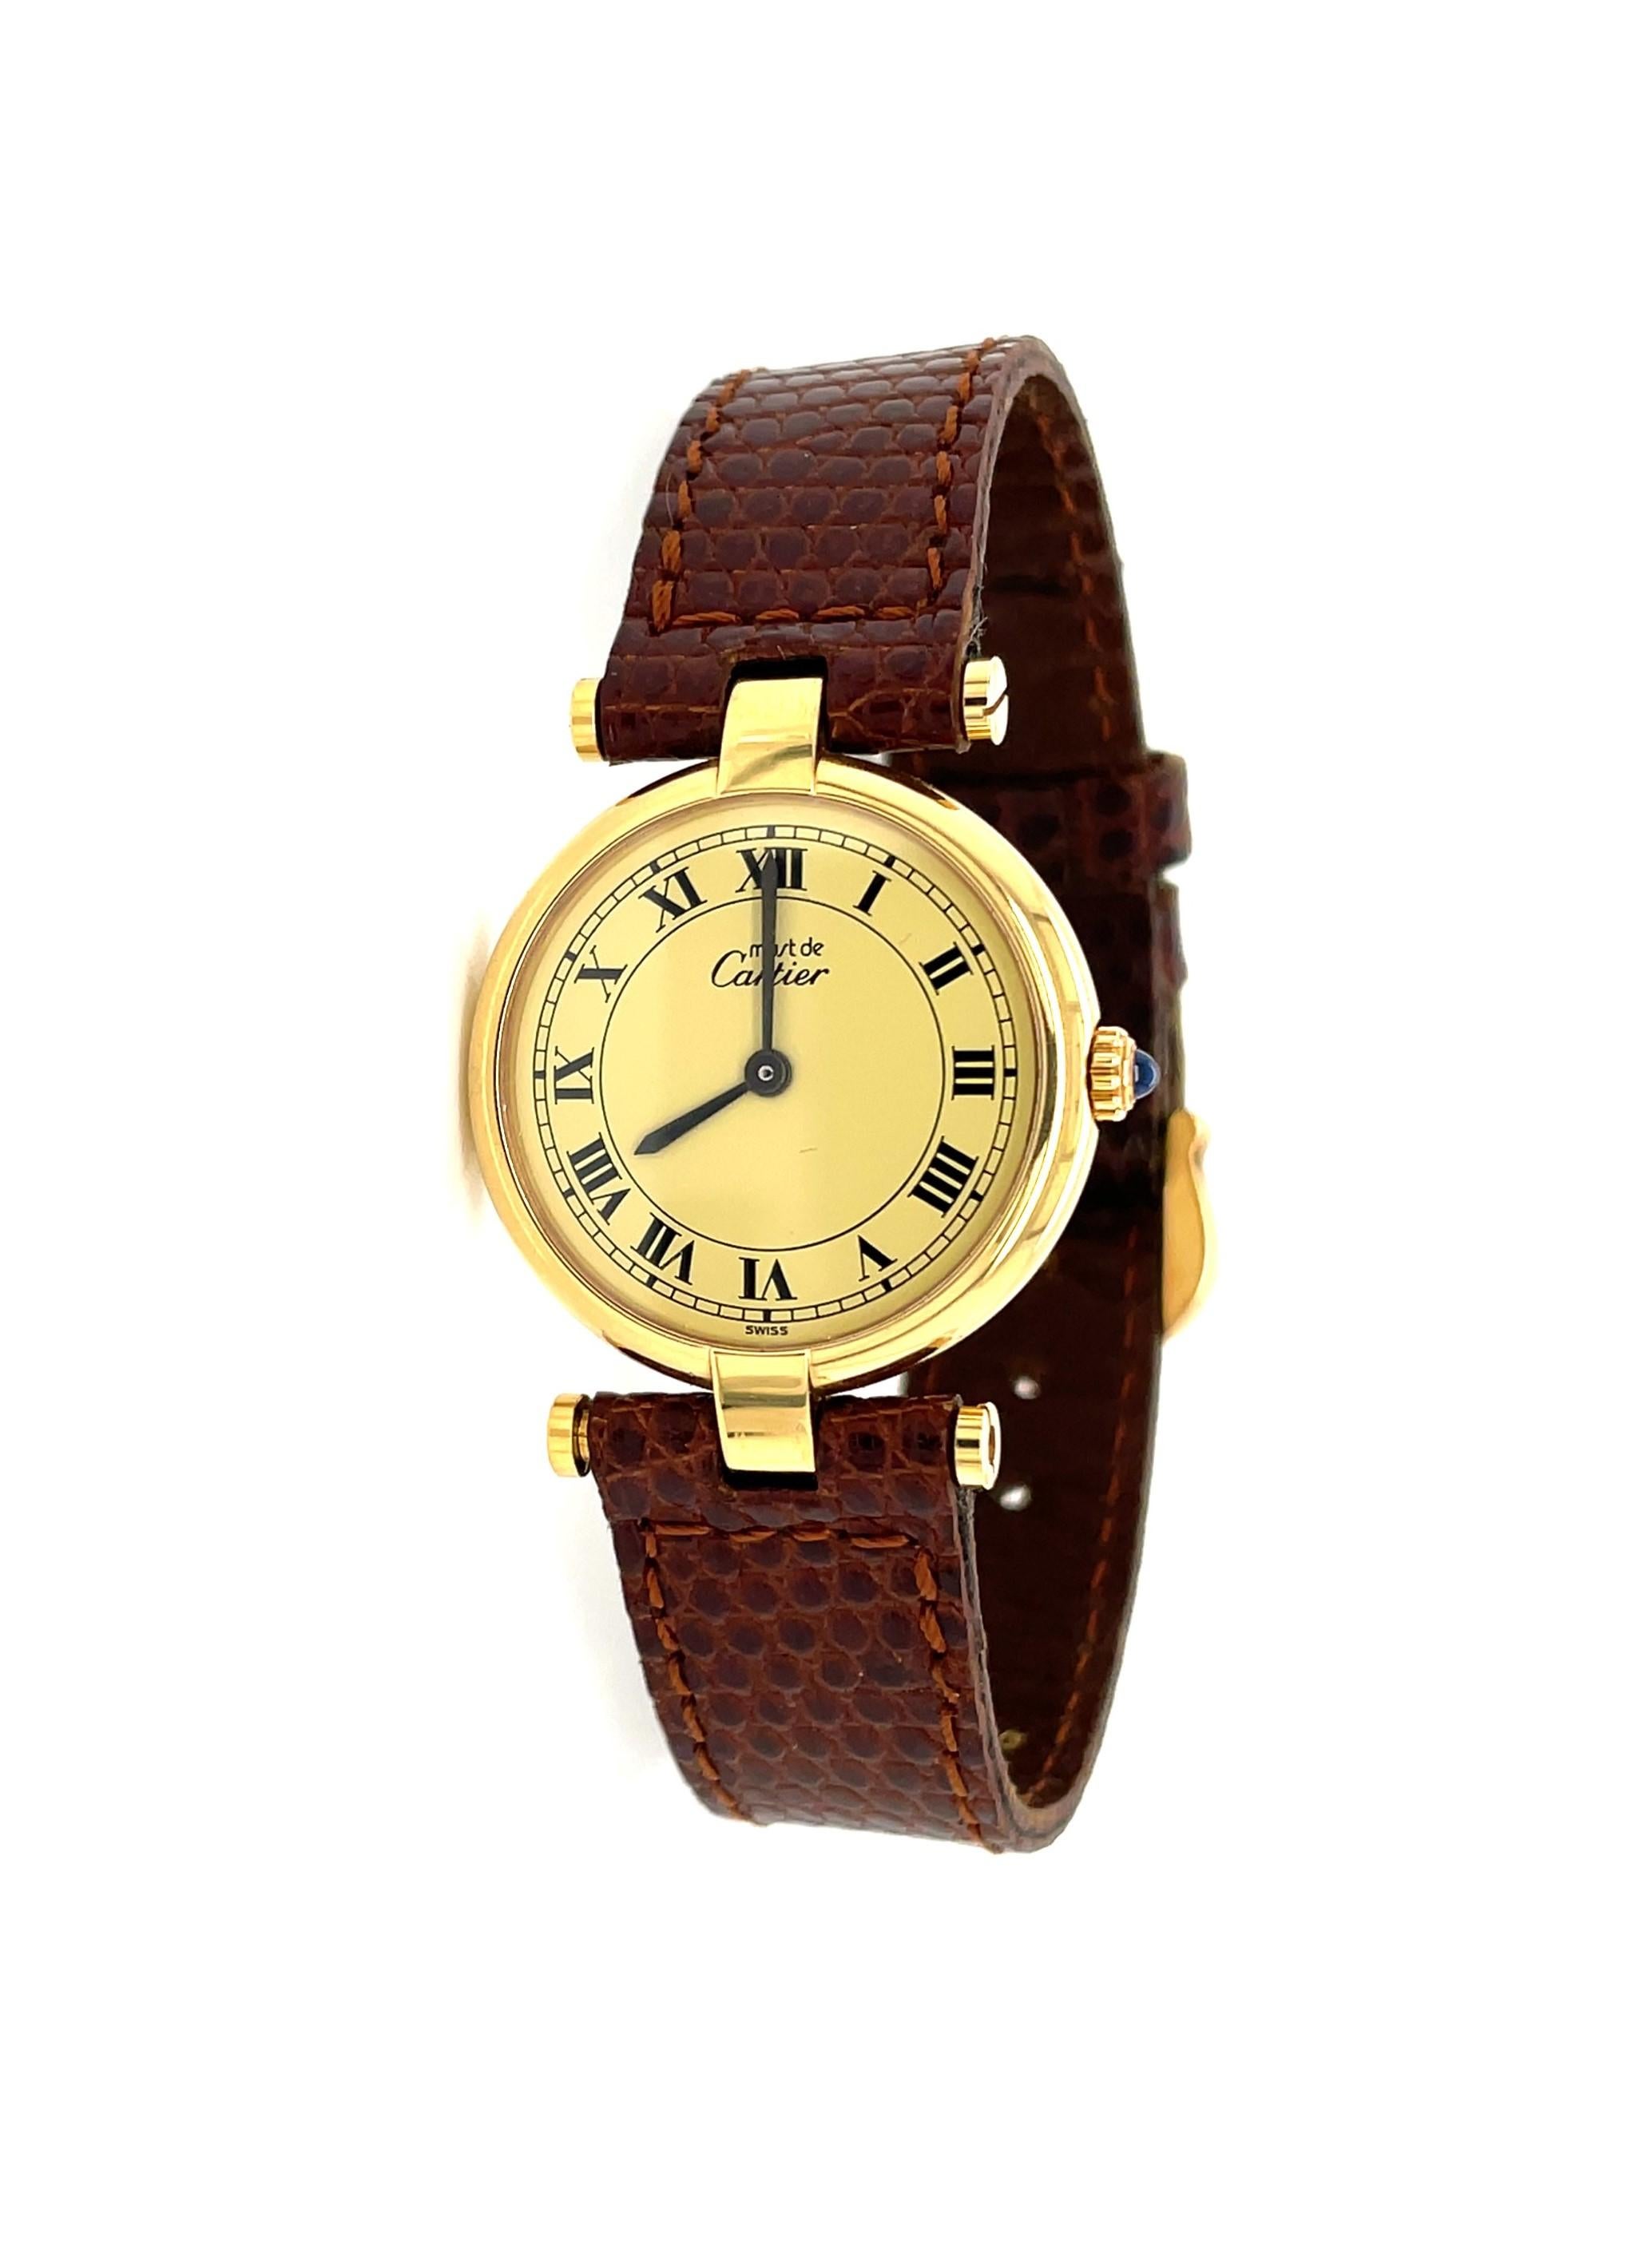 Own this Cartier Must de Cartier Vendome .925 Argent 18K Gold Vermeil Case 24mm Champagne Dial Quartz Watch
Number 296248, one of Cartier's most popular styles, circa 1990's. This wrist watch is recently updated  and has a new Cartier Swiss Quartz